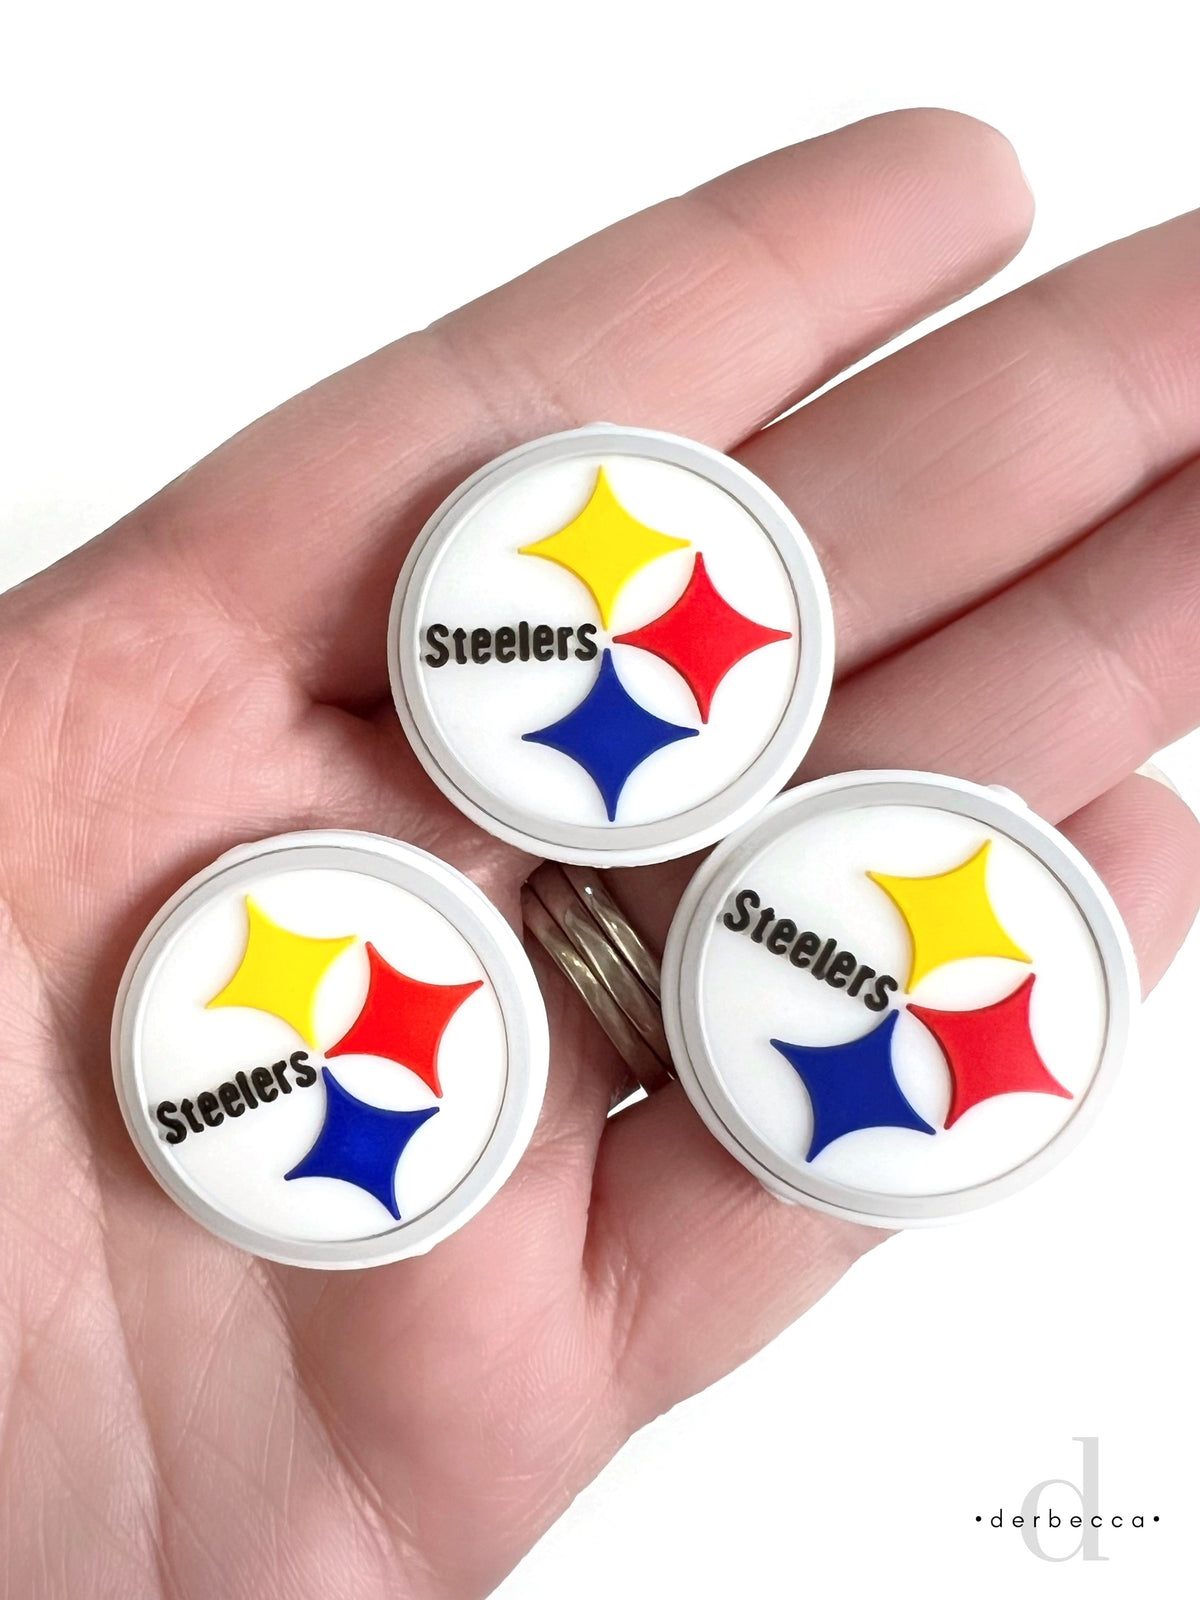 Pittsburgh Steelers Silicone Focal Bead in team colors red, yellow, blue, white and grey